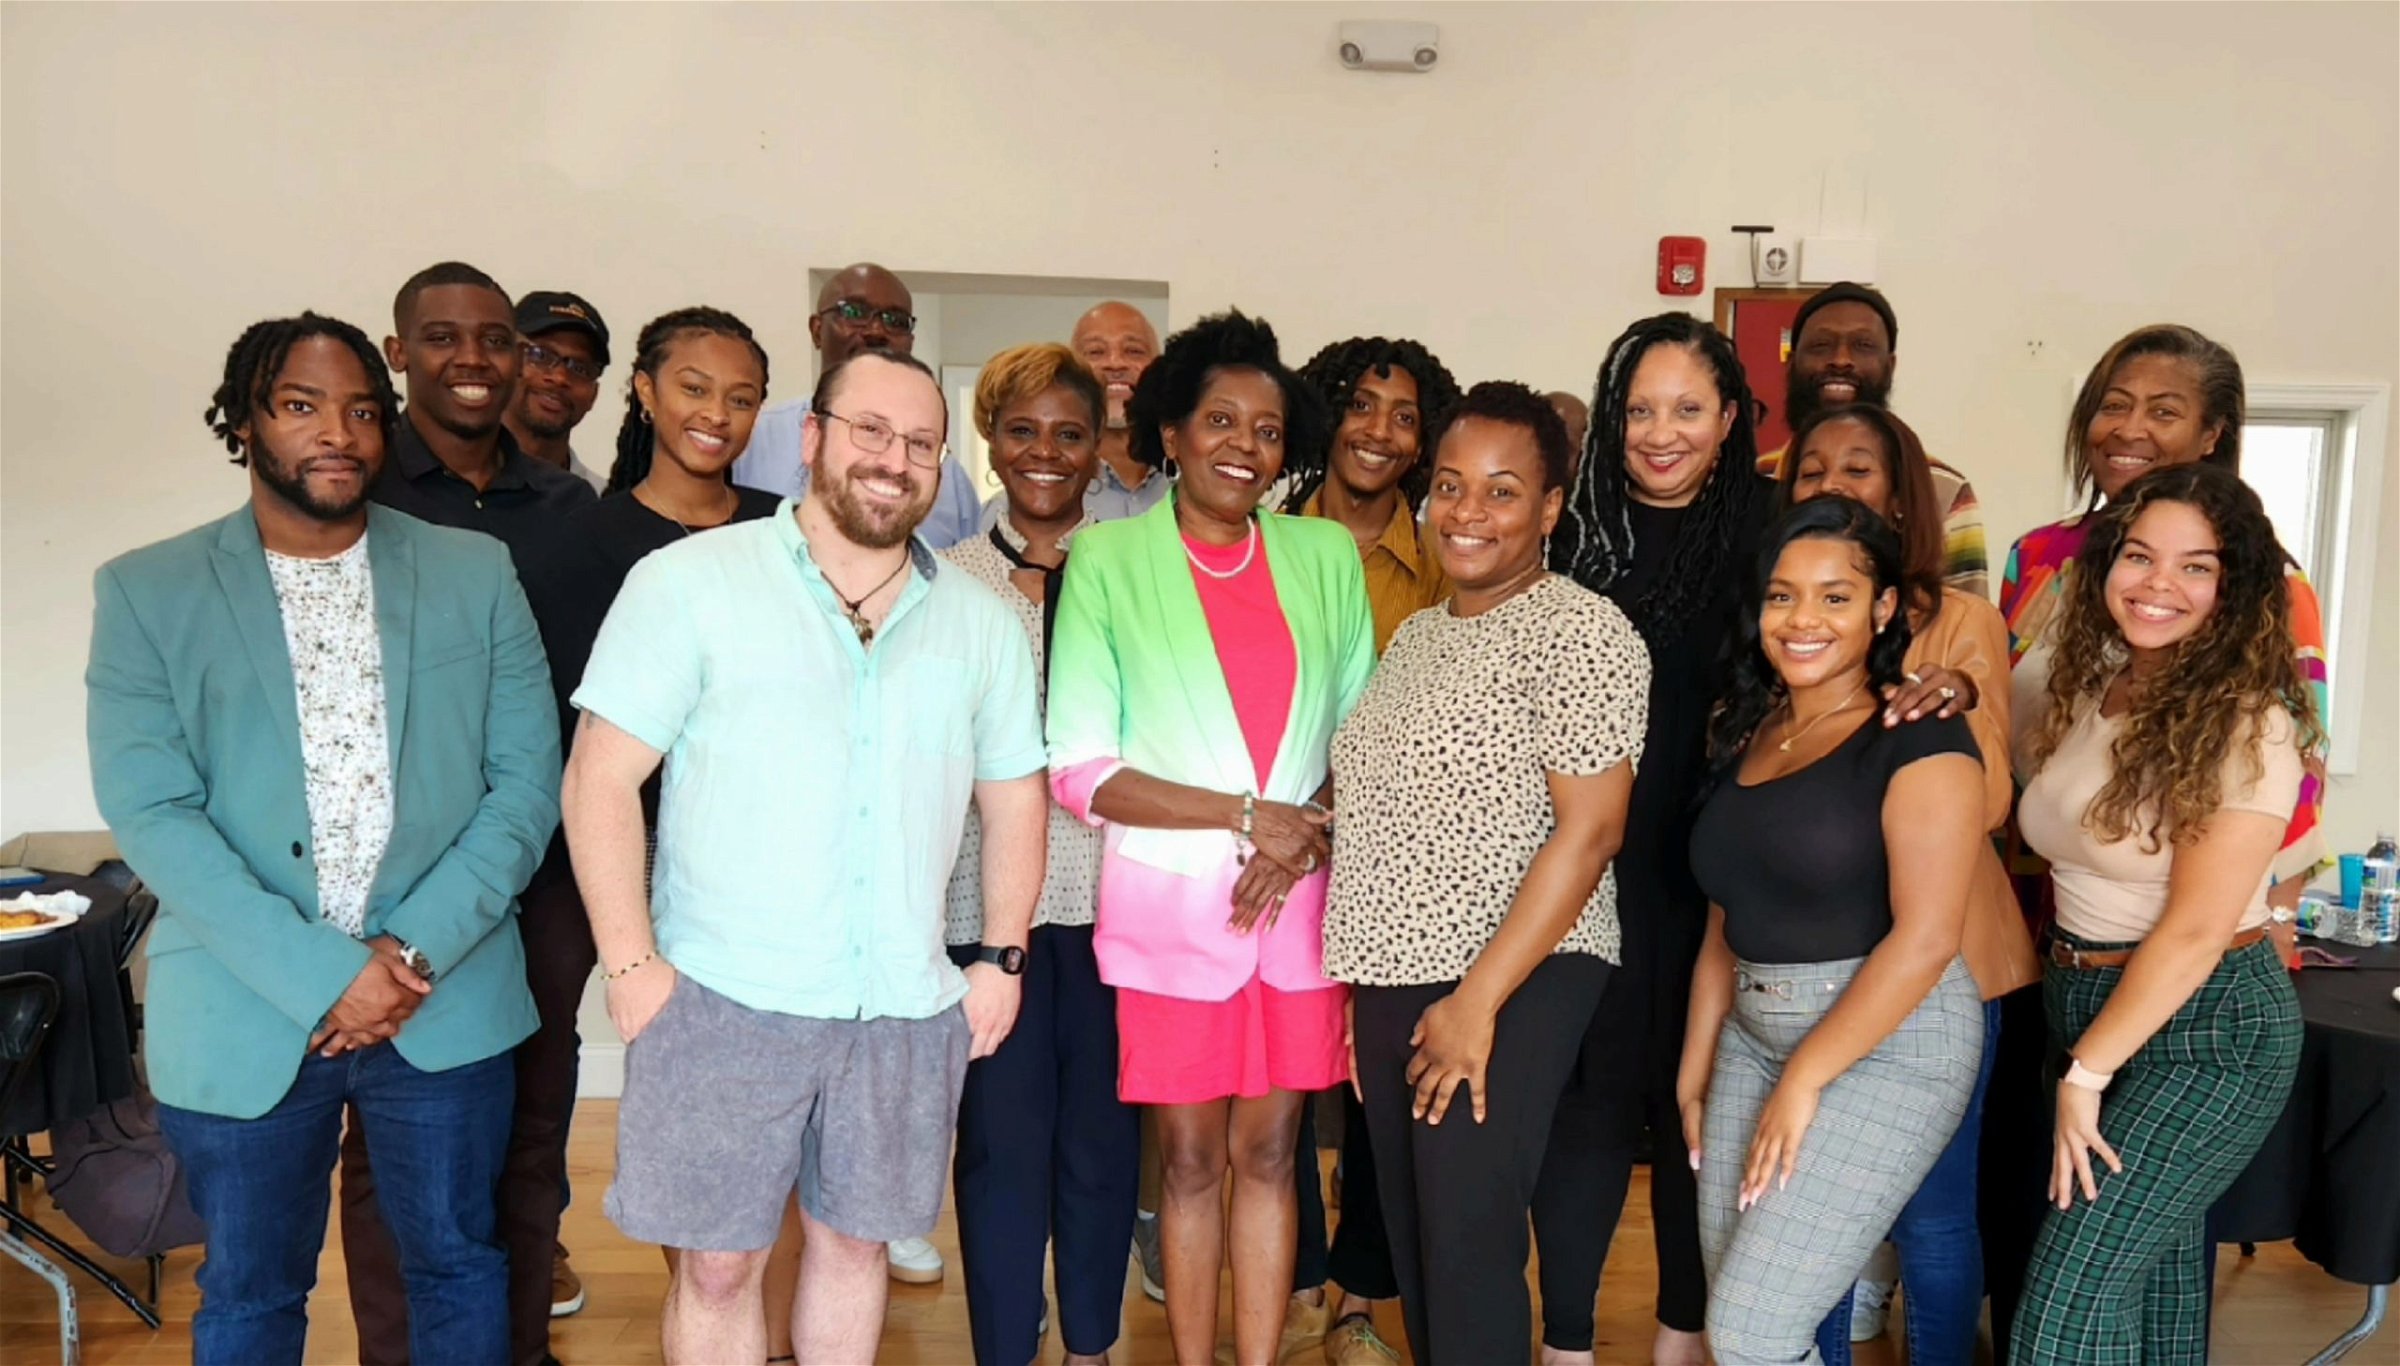 A group of about 20 Black journalists, media makers, and artists from South Jersey (plus a white guy named Joe in the front row) smile as they pose for a photo after a local journalism event.